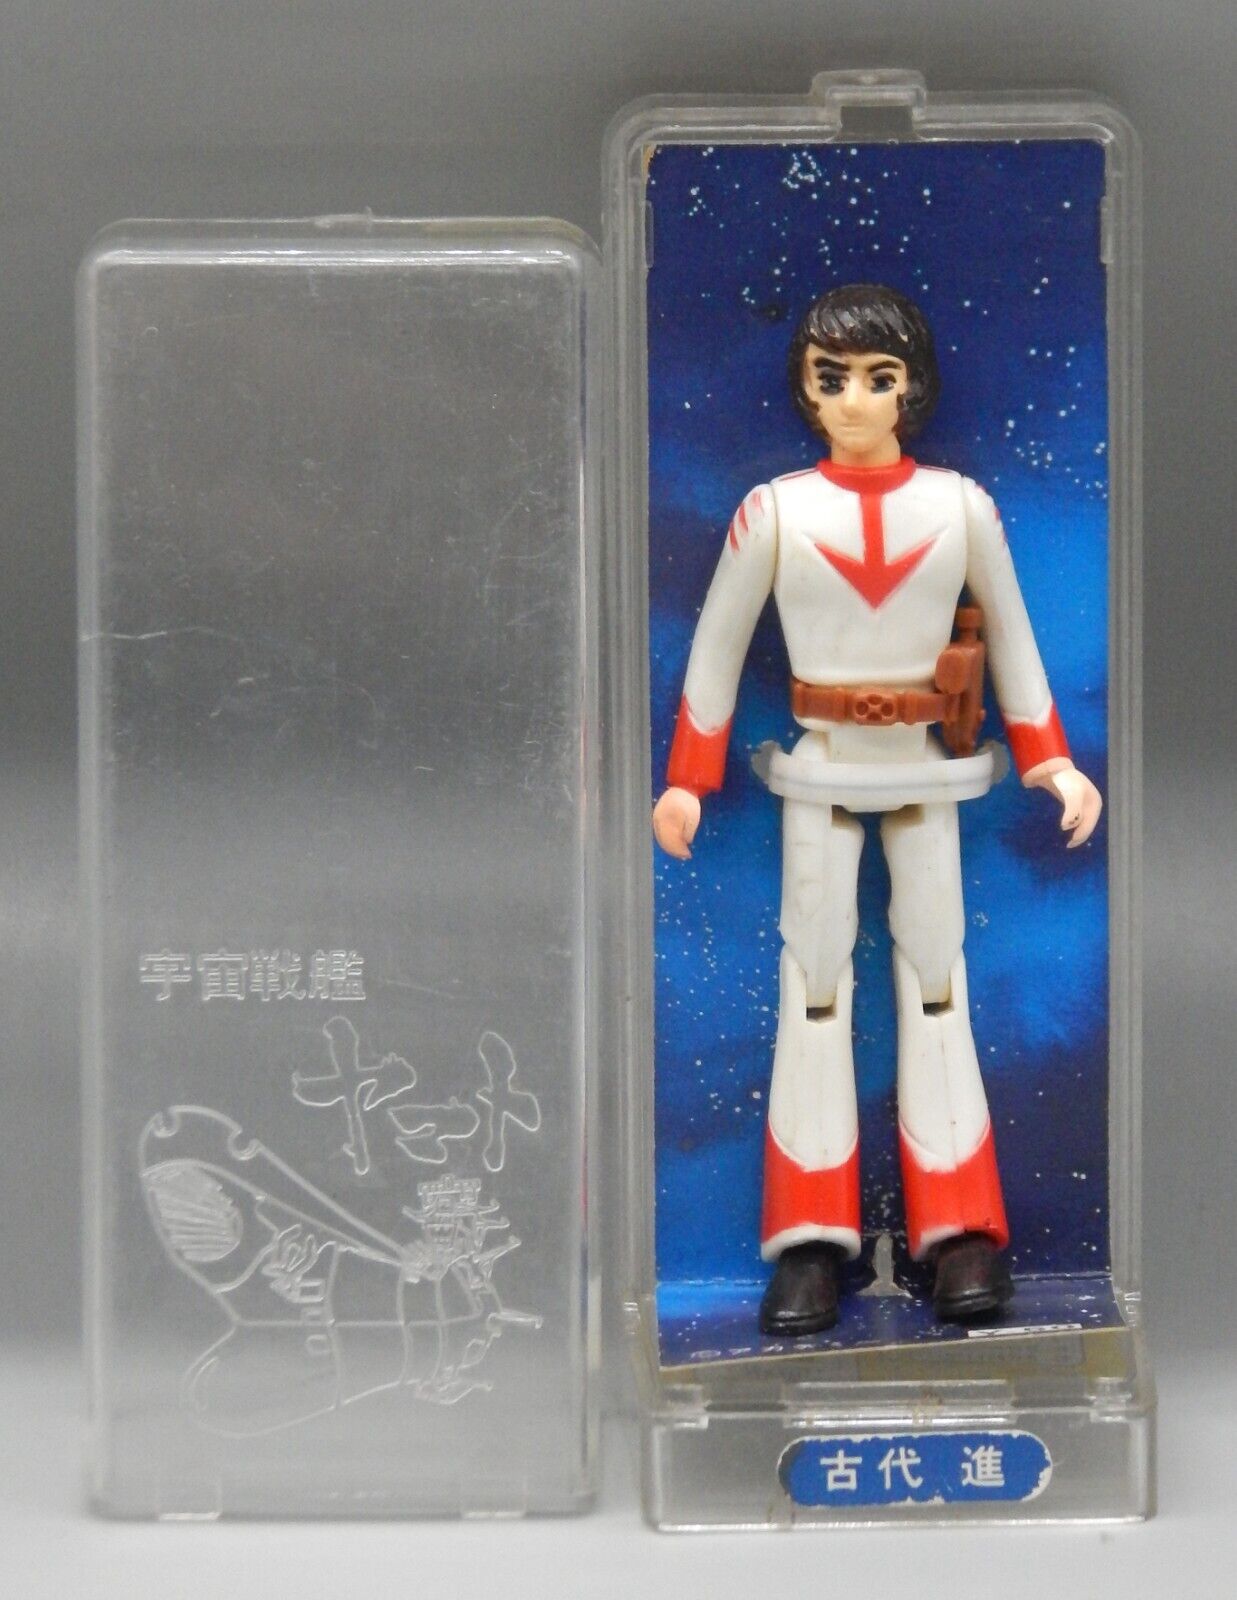 Star Blazers ActioN Figure - 5 Awesome Things on eBay this week